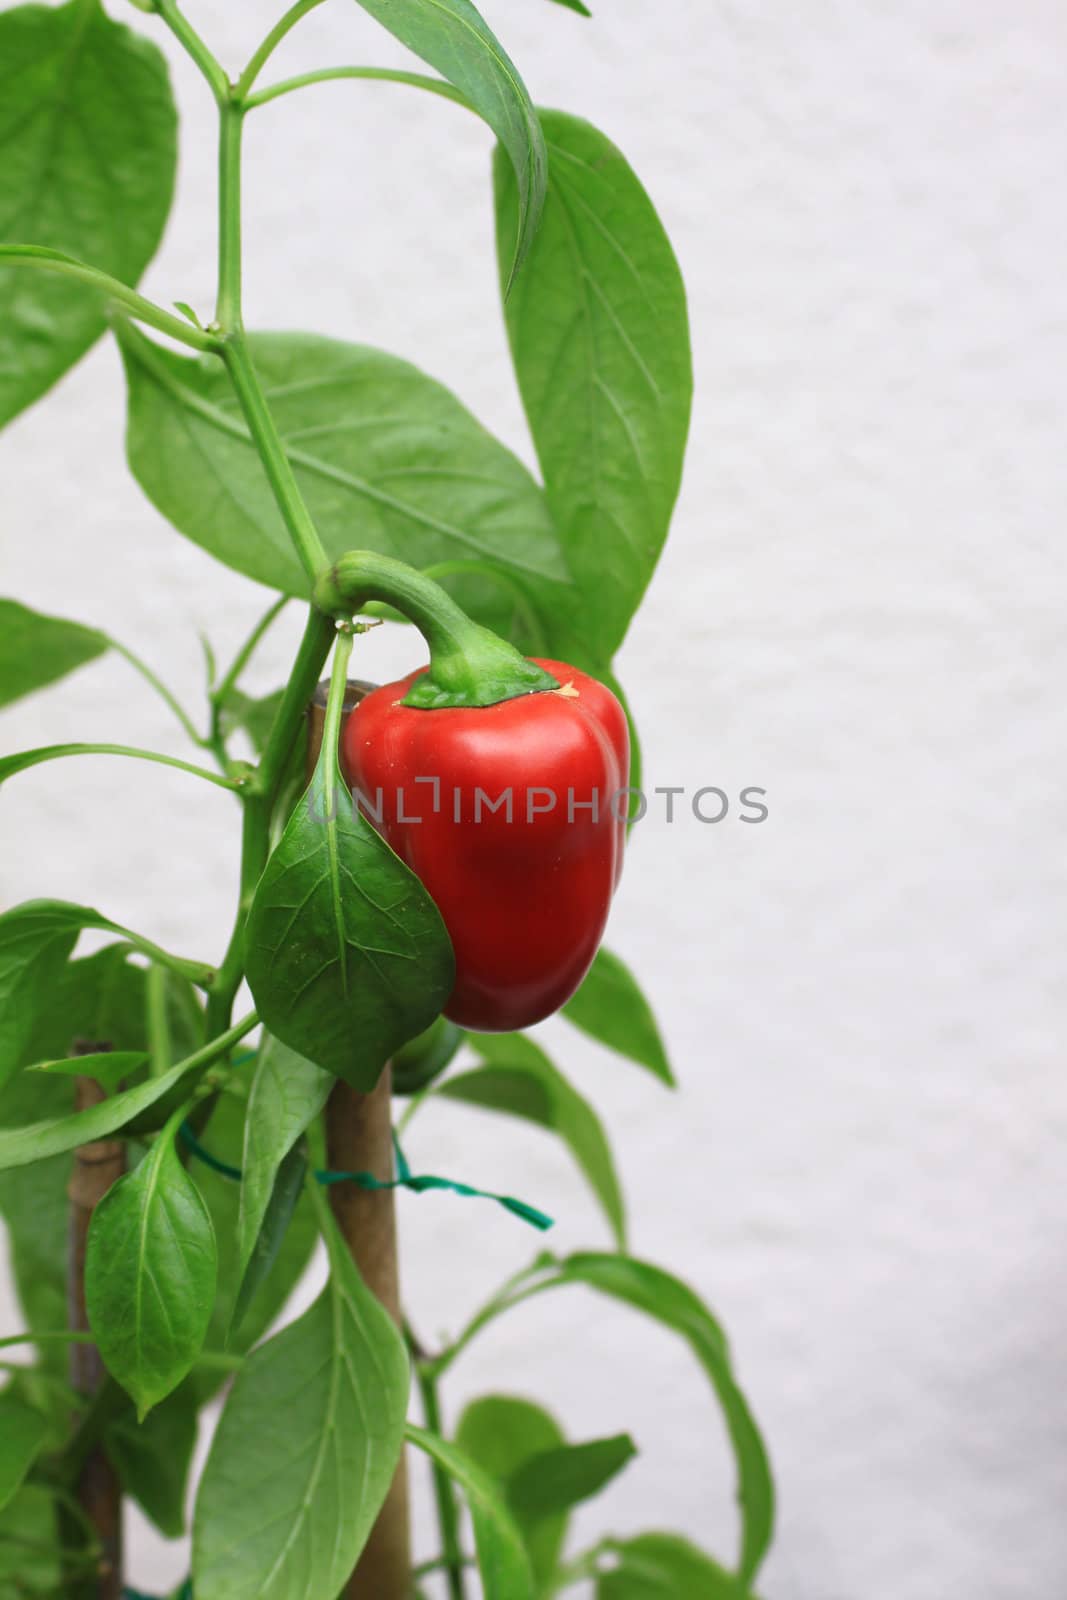 A Ripe and ready organically grown red pepper. Set against a neutral background in a portrait format. Pepper still on its plant with green leaves.